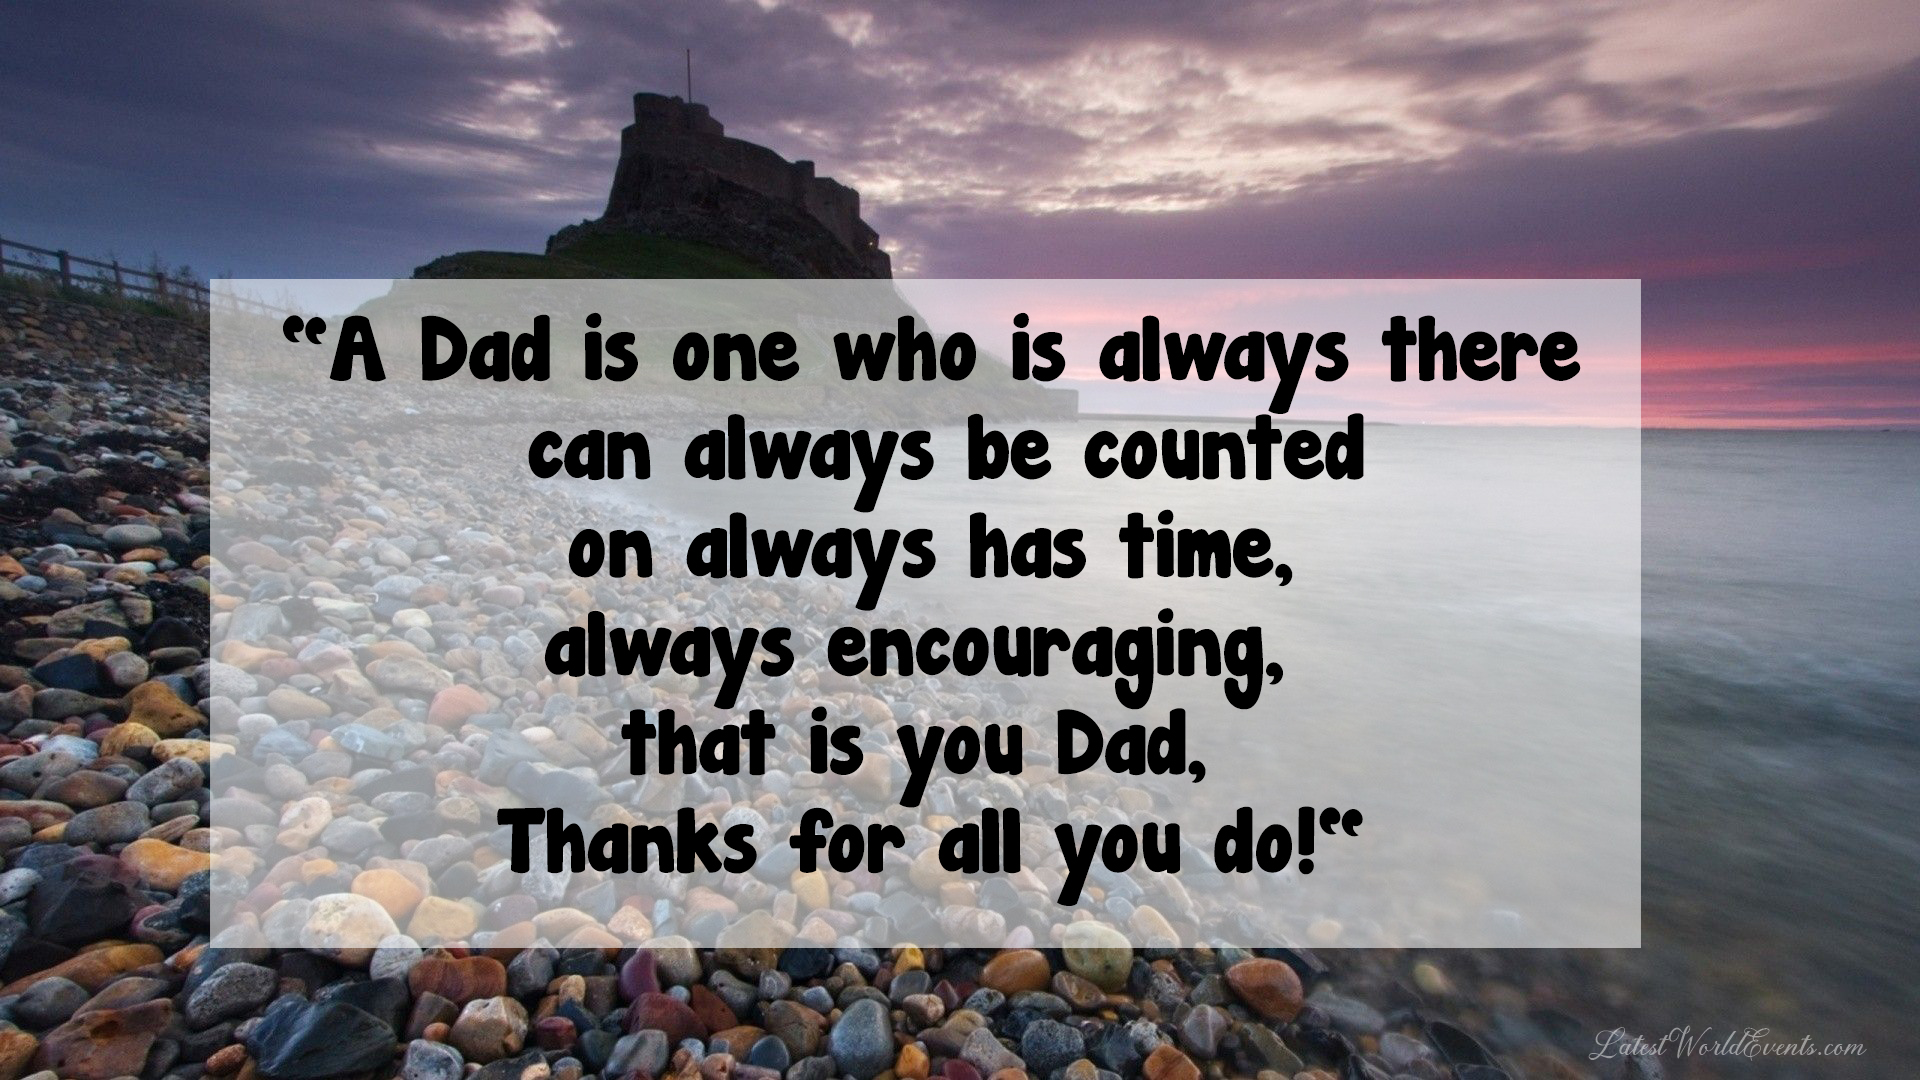 Quotes about being a good father & Dad inspirational quotes